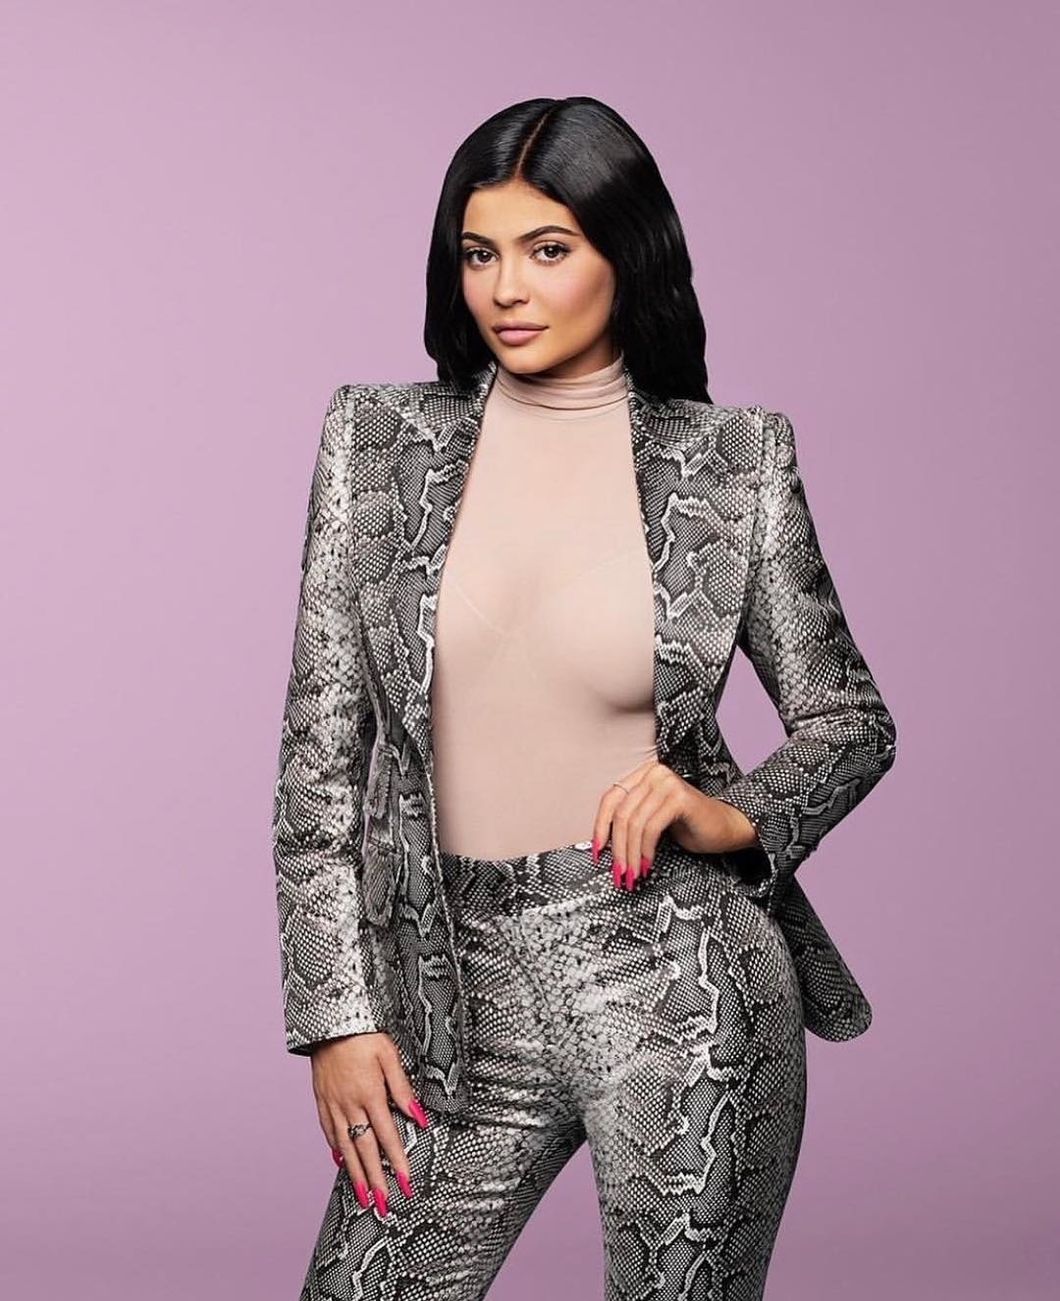 Kylie Jenner Is Absolutely NOT A 'Self-Made' Billionaire, Don't @ Me